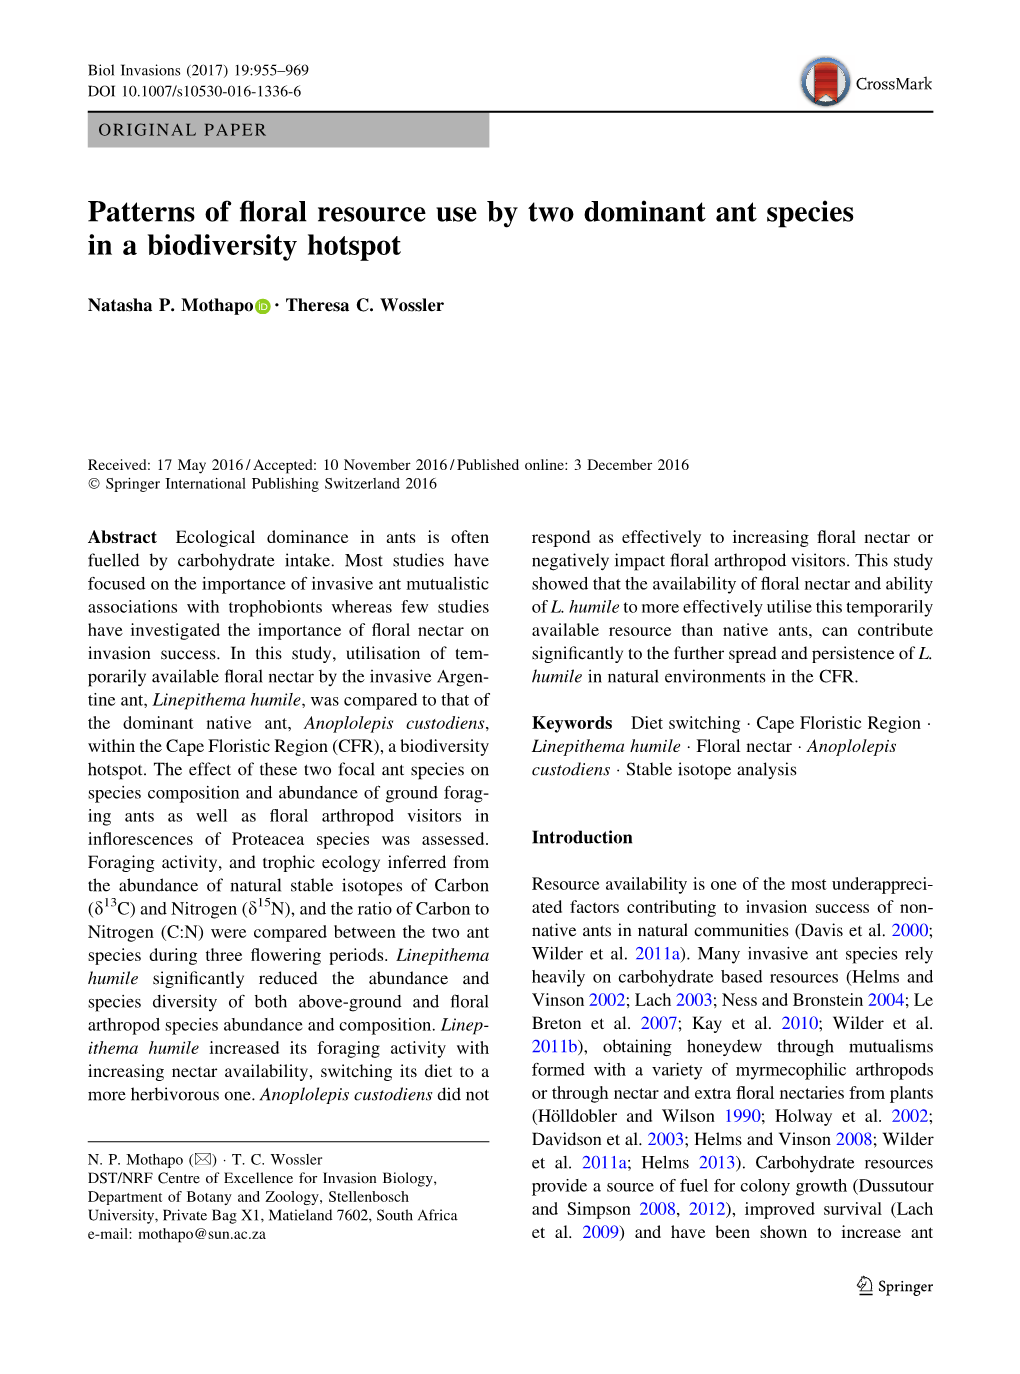 Patterns of Floral Resource Use by Two Dominant Ant Species in A